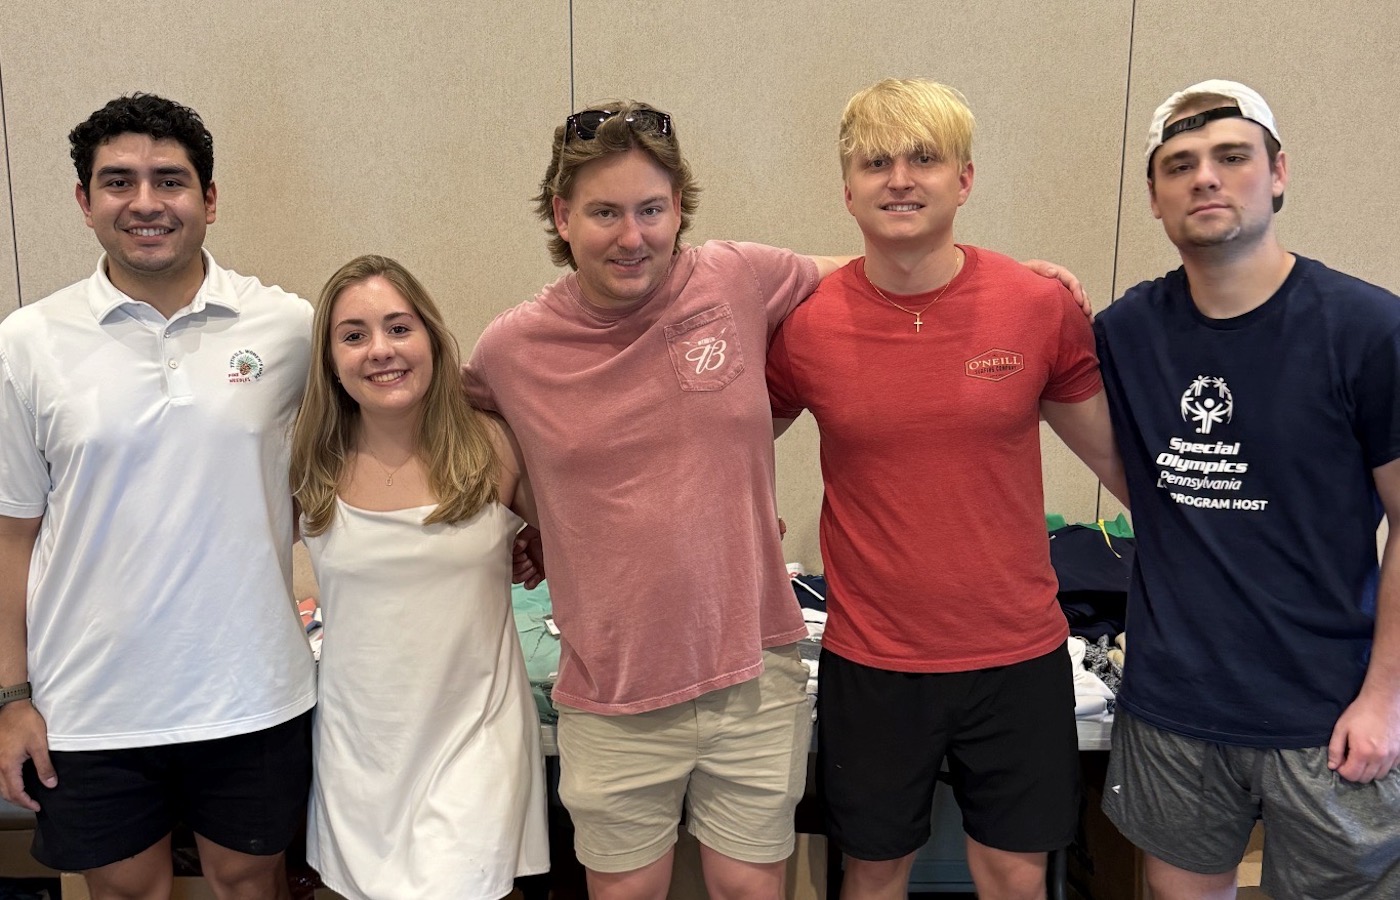 Students involved in the annual business golf sale fundraiser